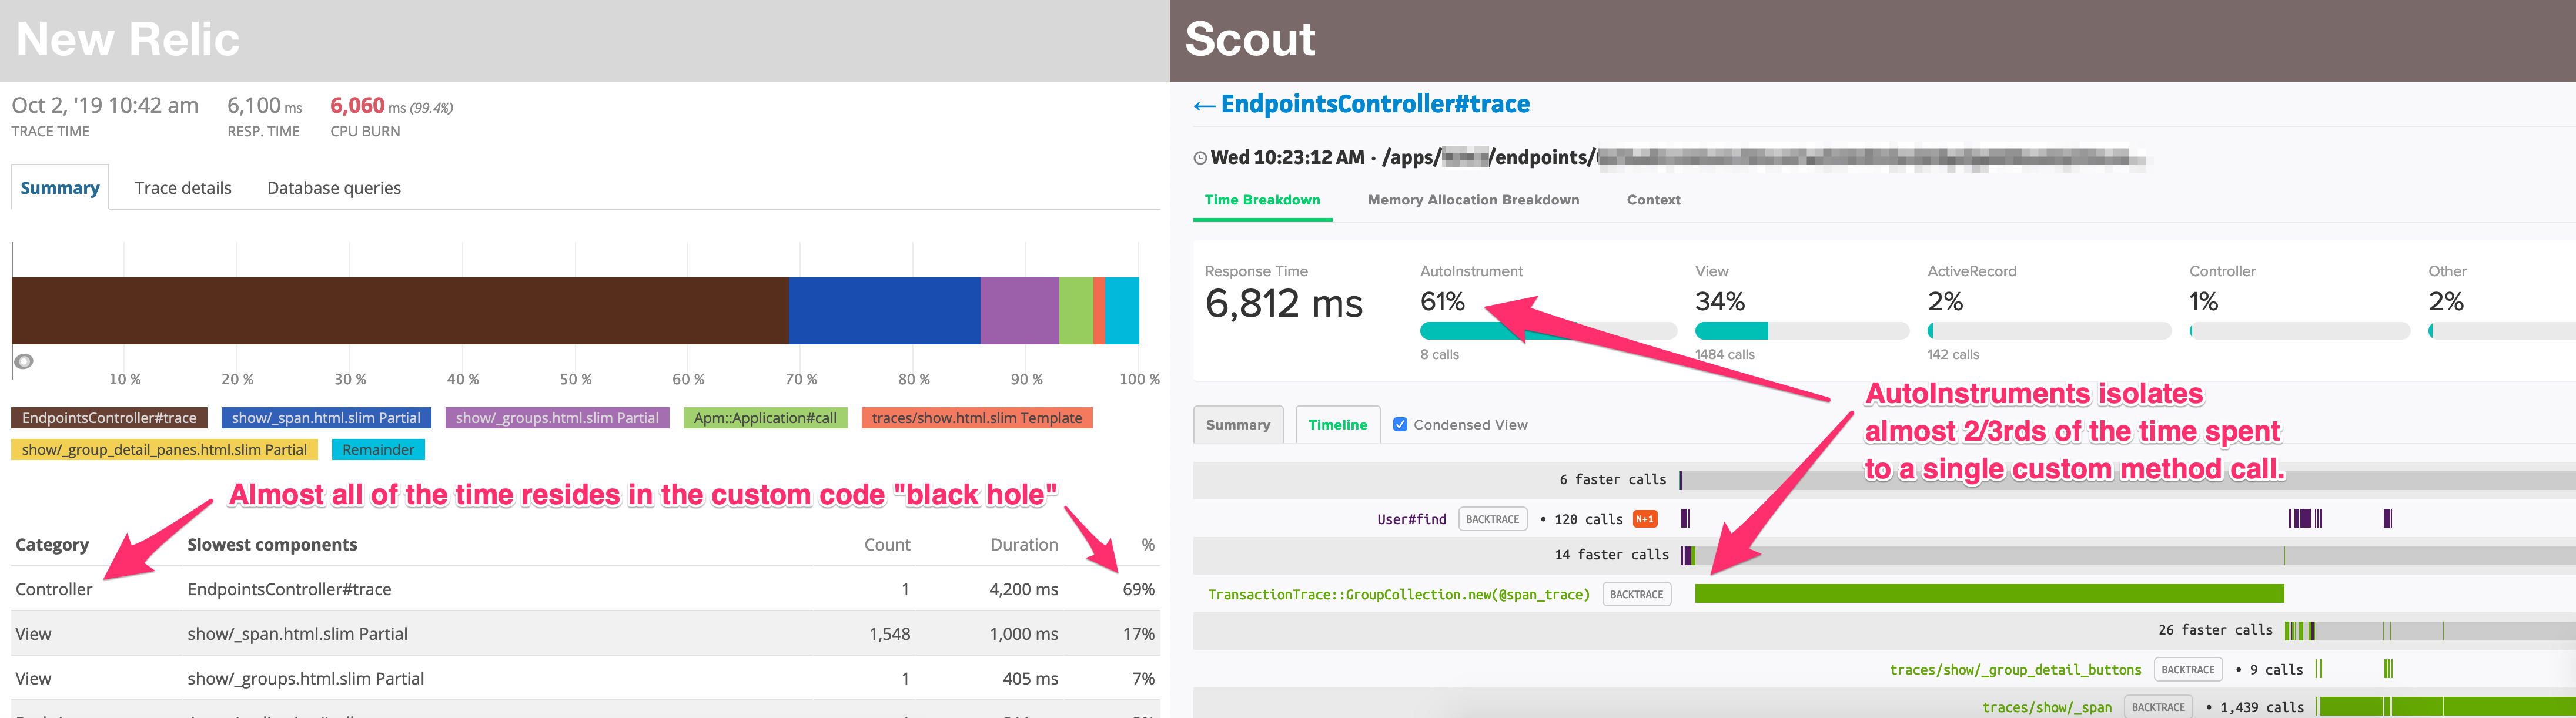 newrelic_scout.png